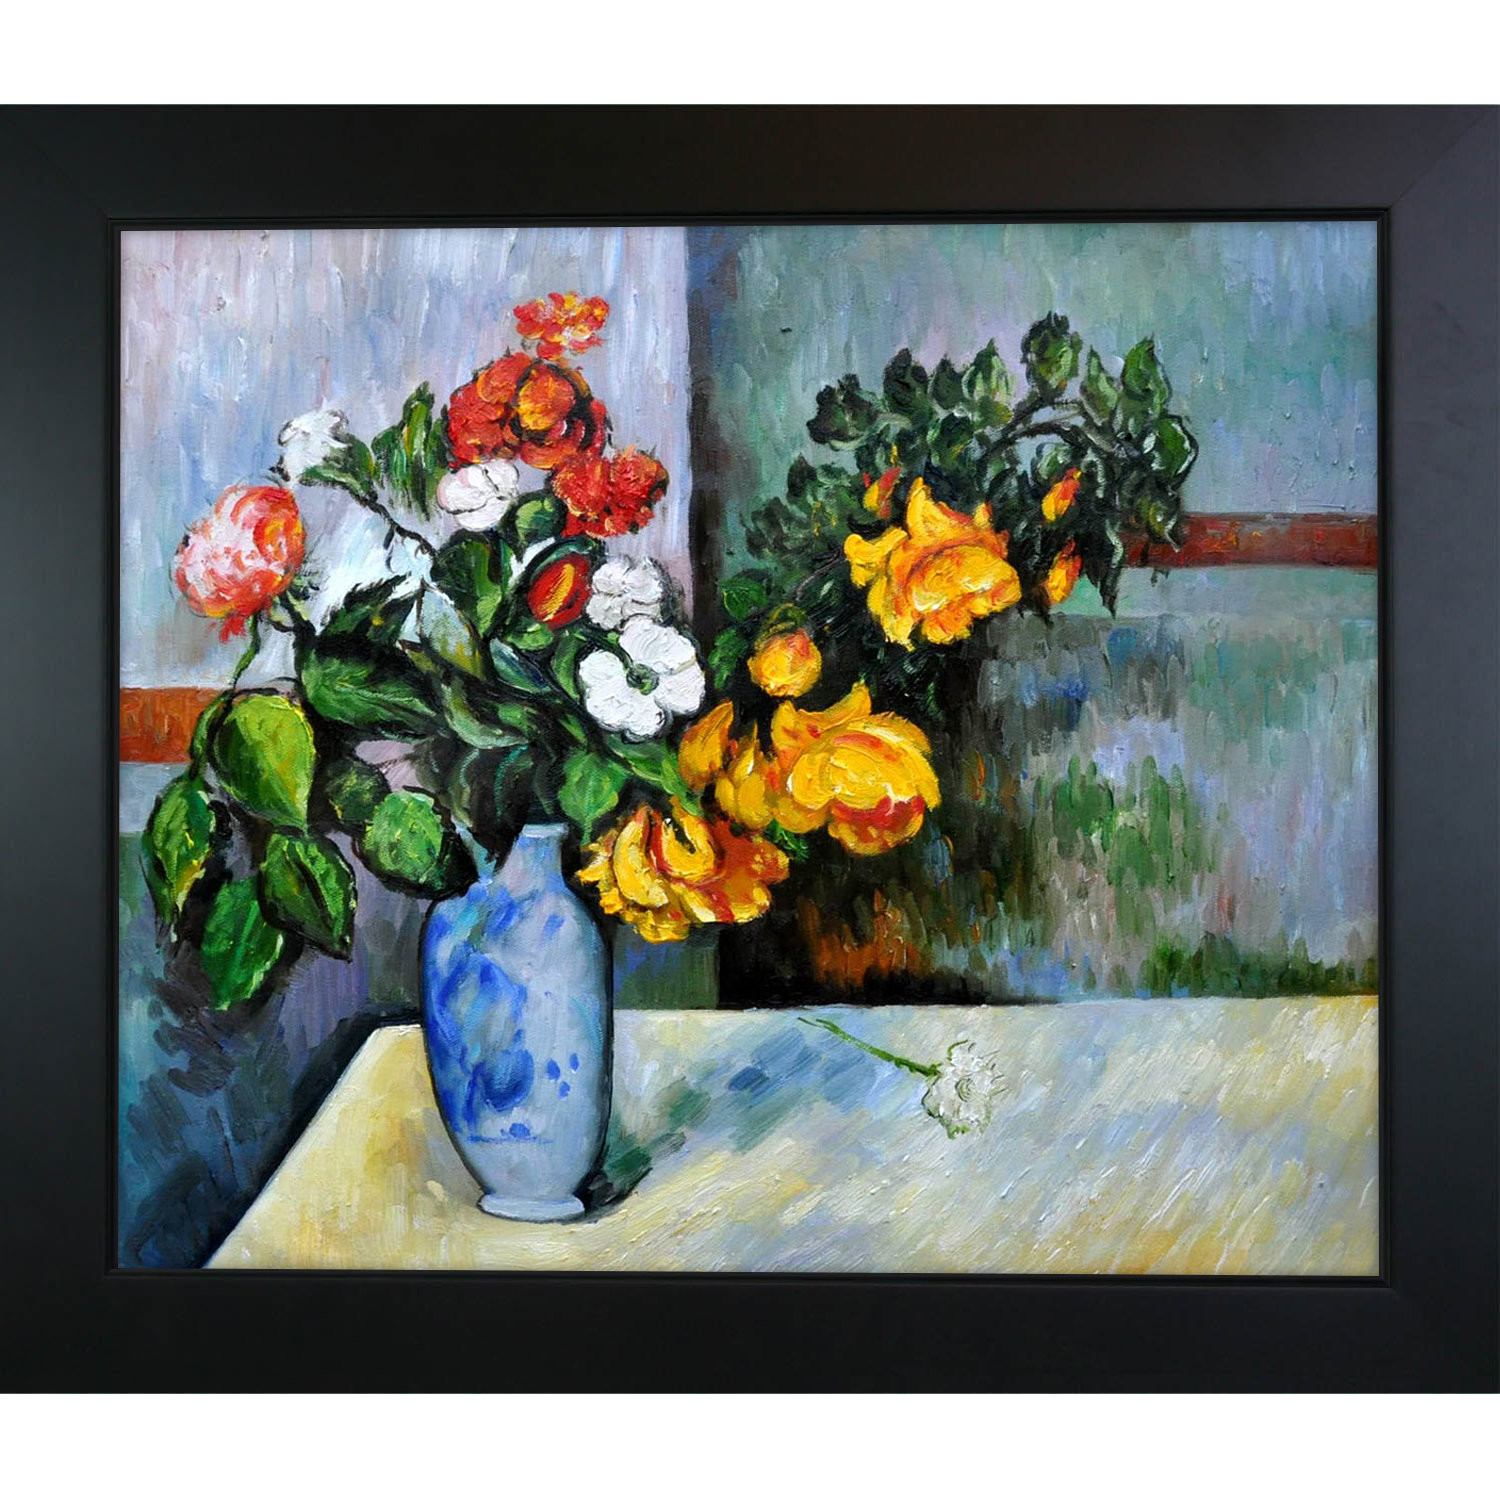 28 attractive the Blue Vase by Paul Cezanne original 2024 free download the blue vase by paul cezanne original of tori home still life flowers in vase by paul cezanne framed painting intended for tori home still life flowers in vase by paul cezanne framed painti